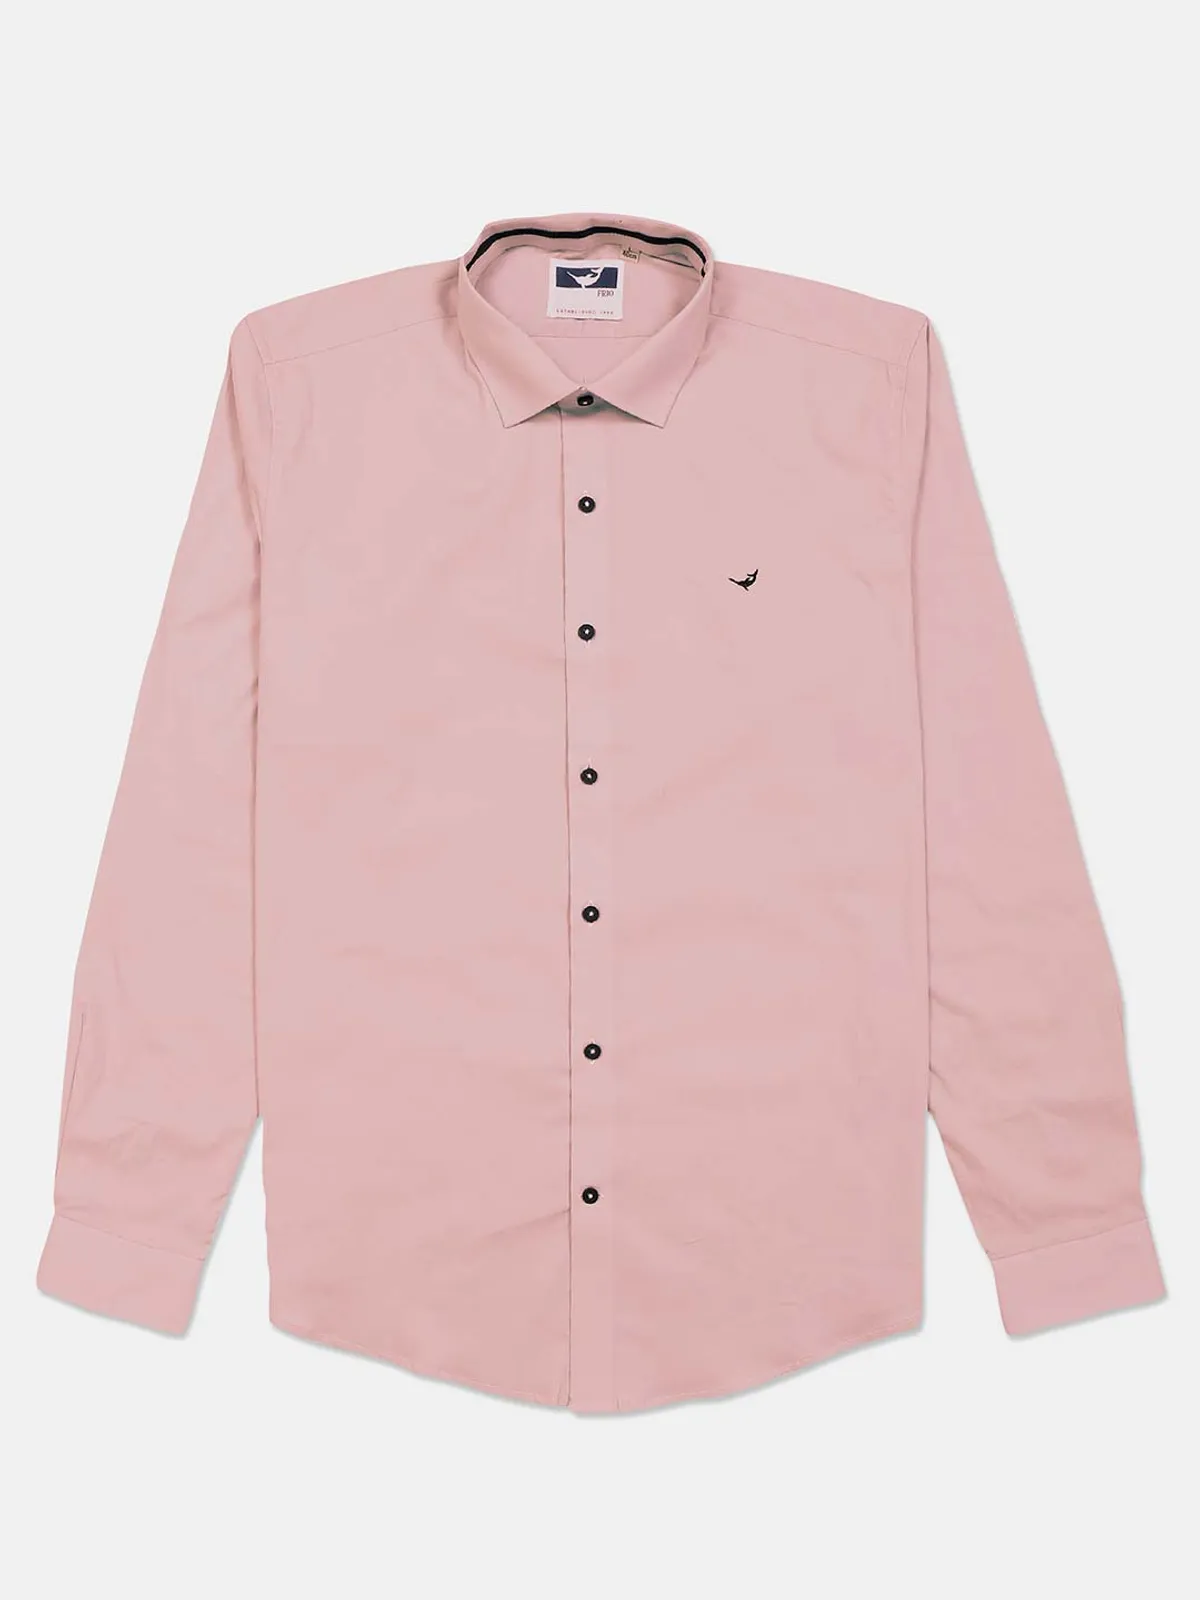 Frio casual cotton shirt in solid pink color